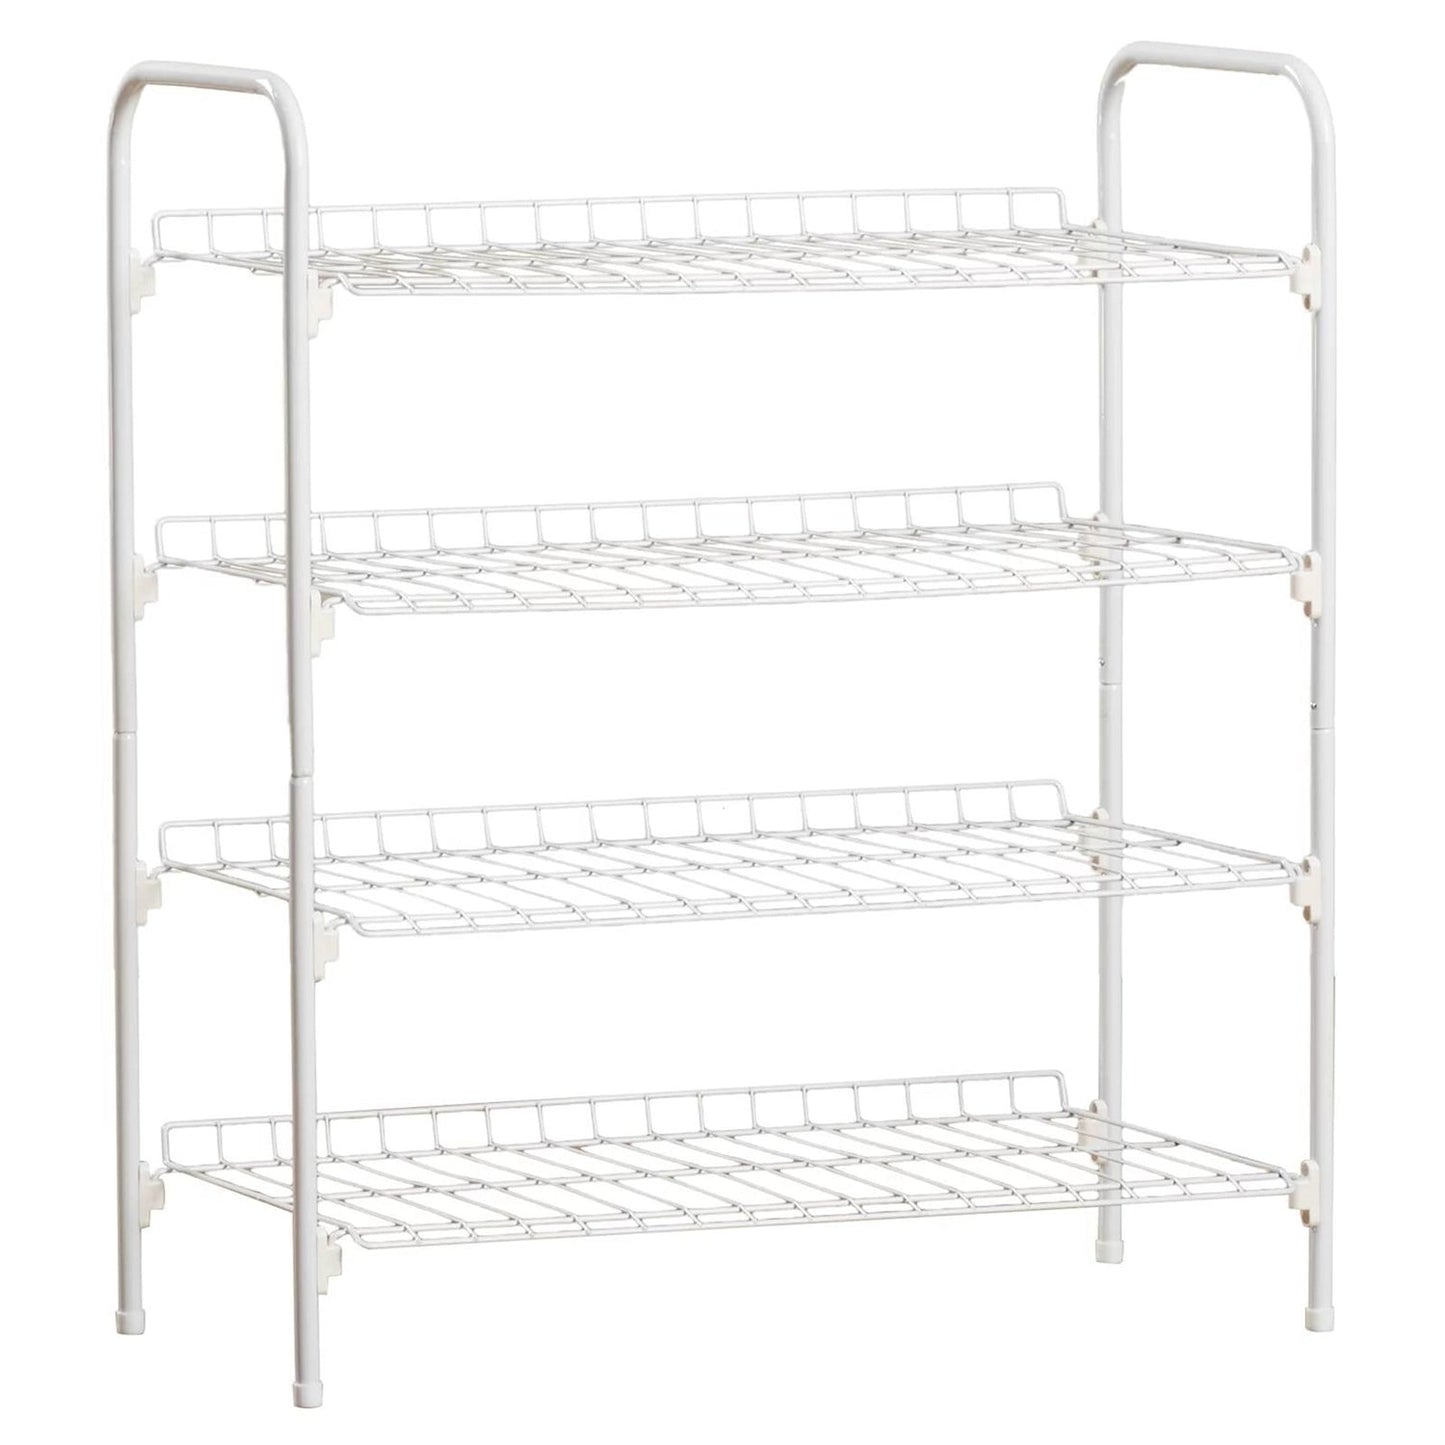 Accents > Shoe Racks - White Metal 4-Shelf Shoe Rack - Holds Up To 9 Pair Of Shoes